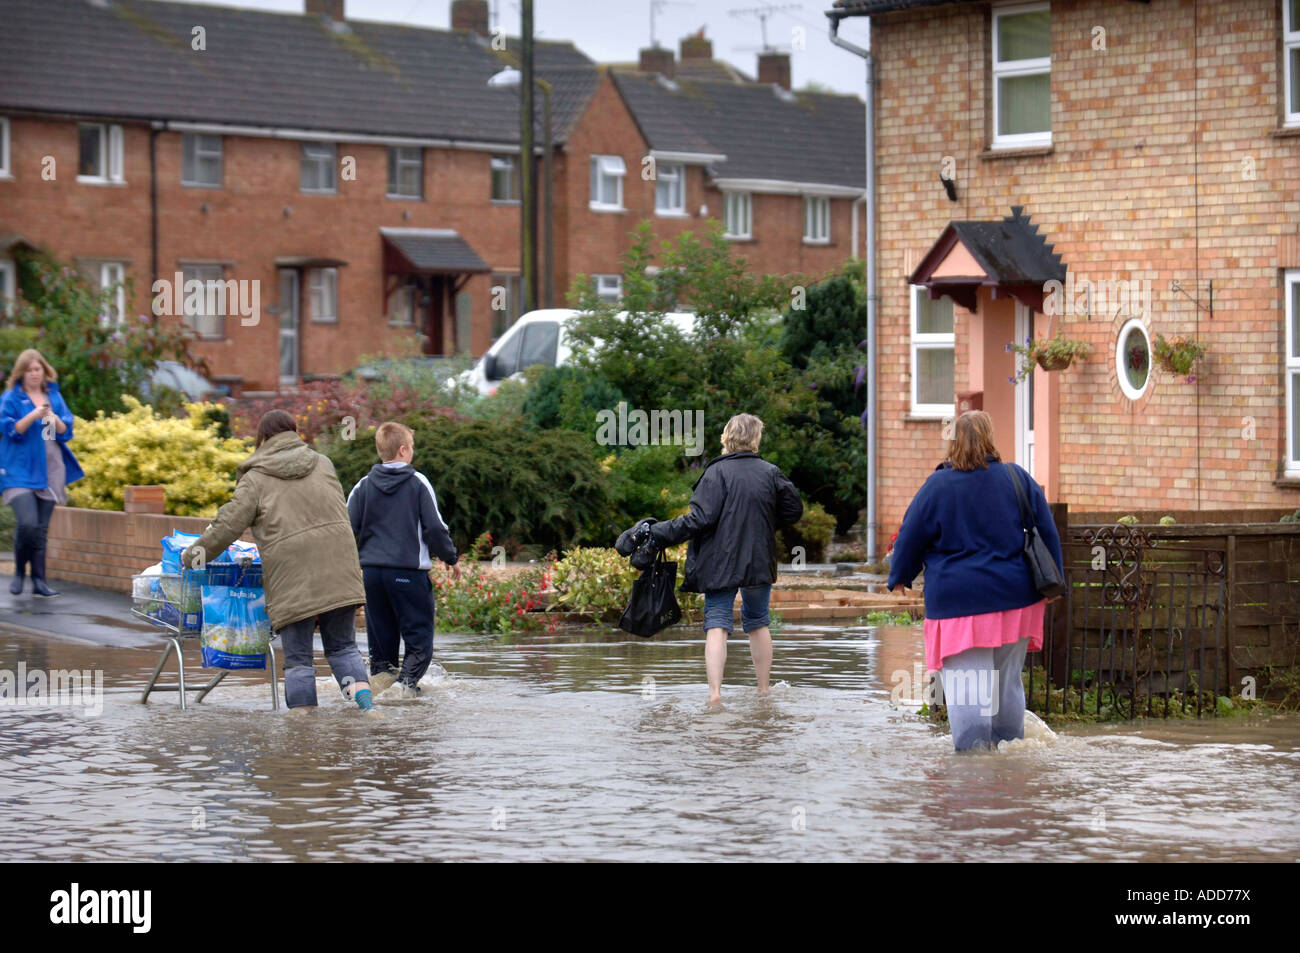 A RESIDENTIAL STREET UNDER FLOODWATER IN TEWKESBURY GLOUCESTERSHIRE UK Stock Photo